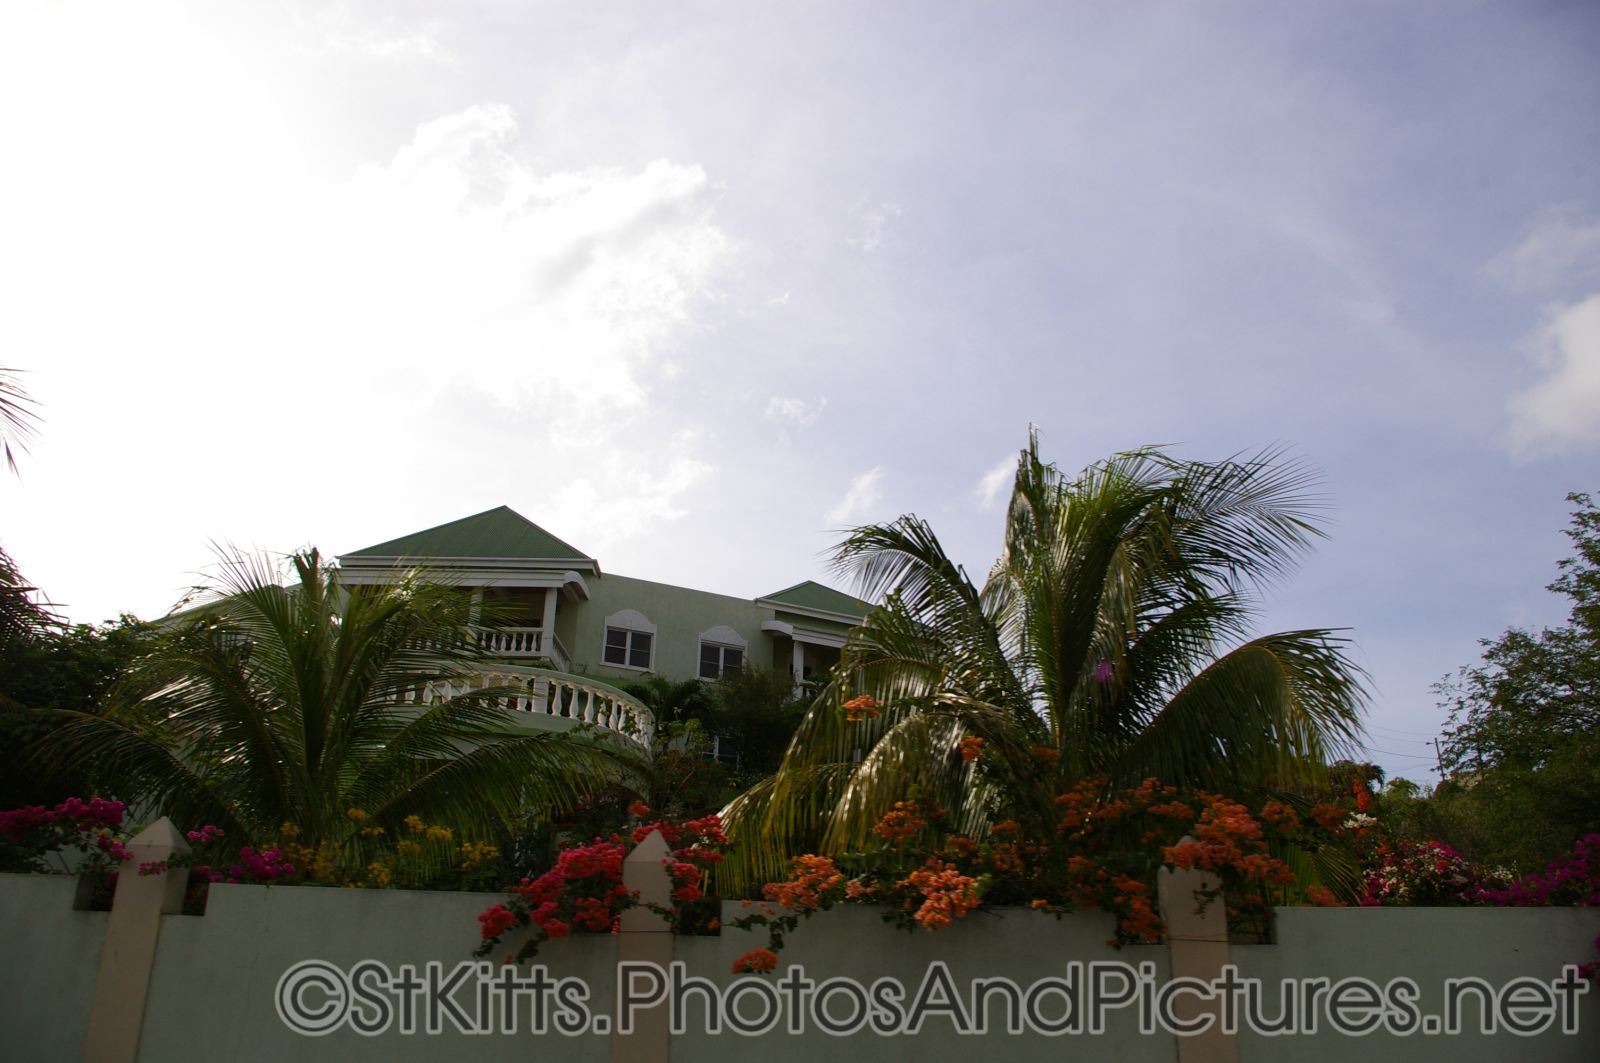 Large home with flowers pouring over walls in St Kitts.jpg
